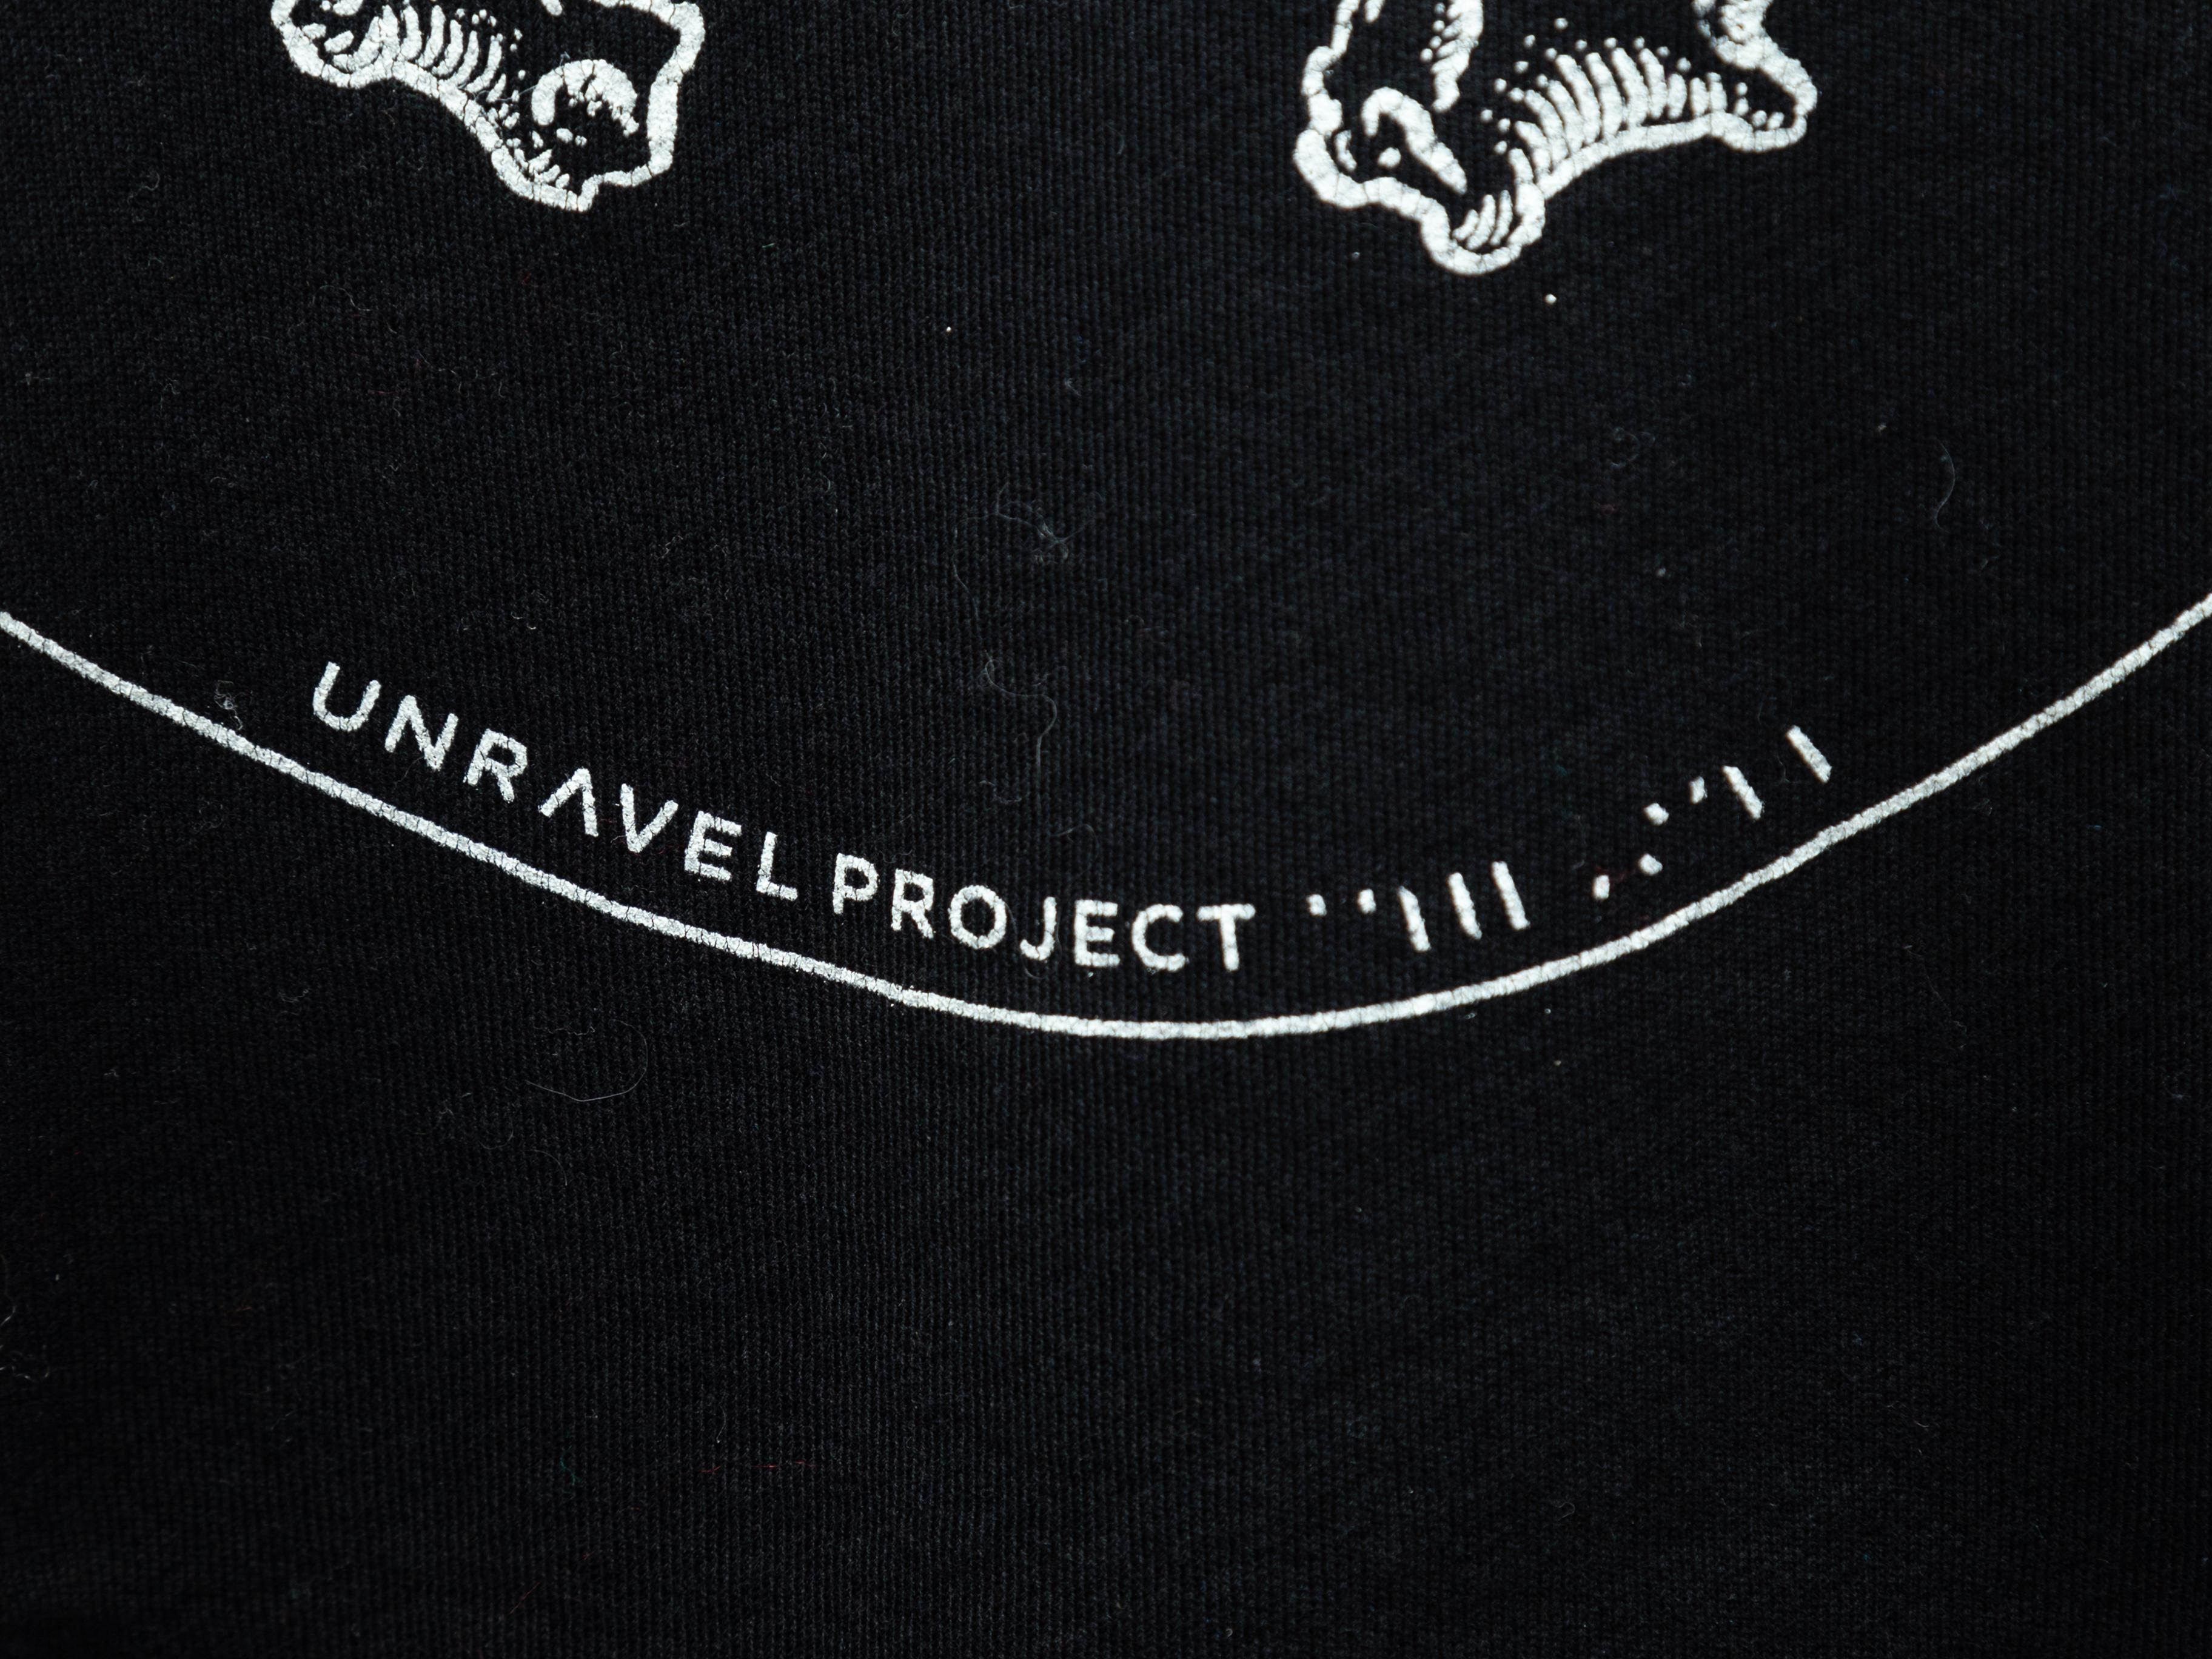 Product details: Black and white distressed sweatshirt by Unravel Project. Crew neck. Logo graphic print at front. 31